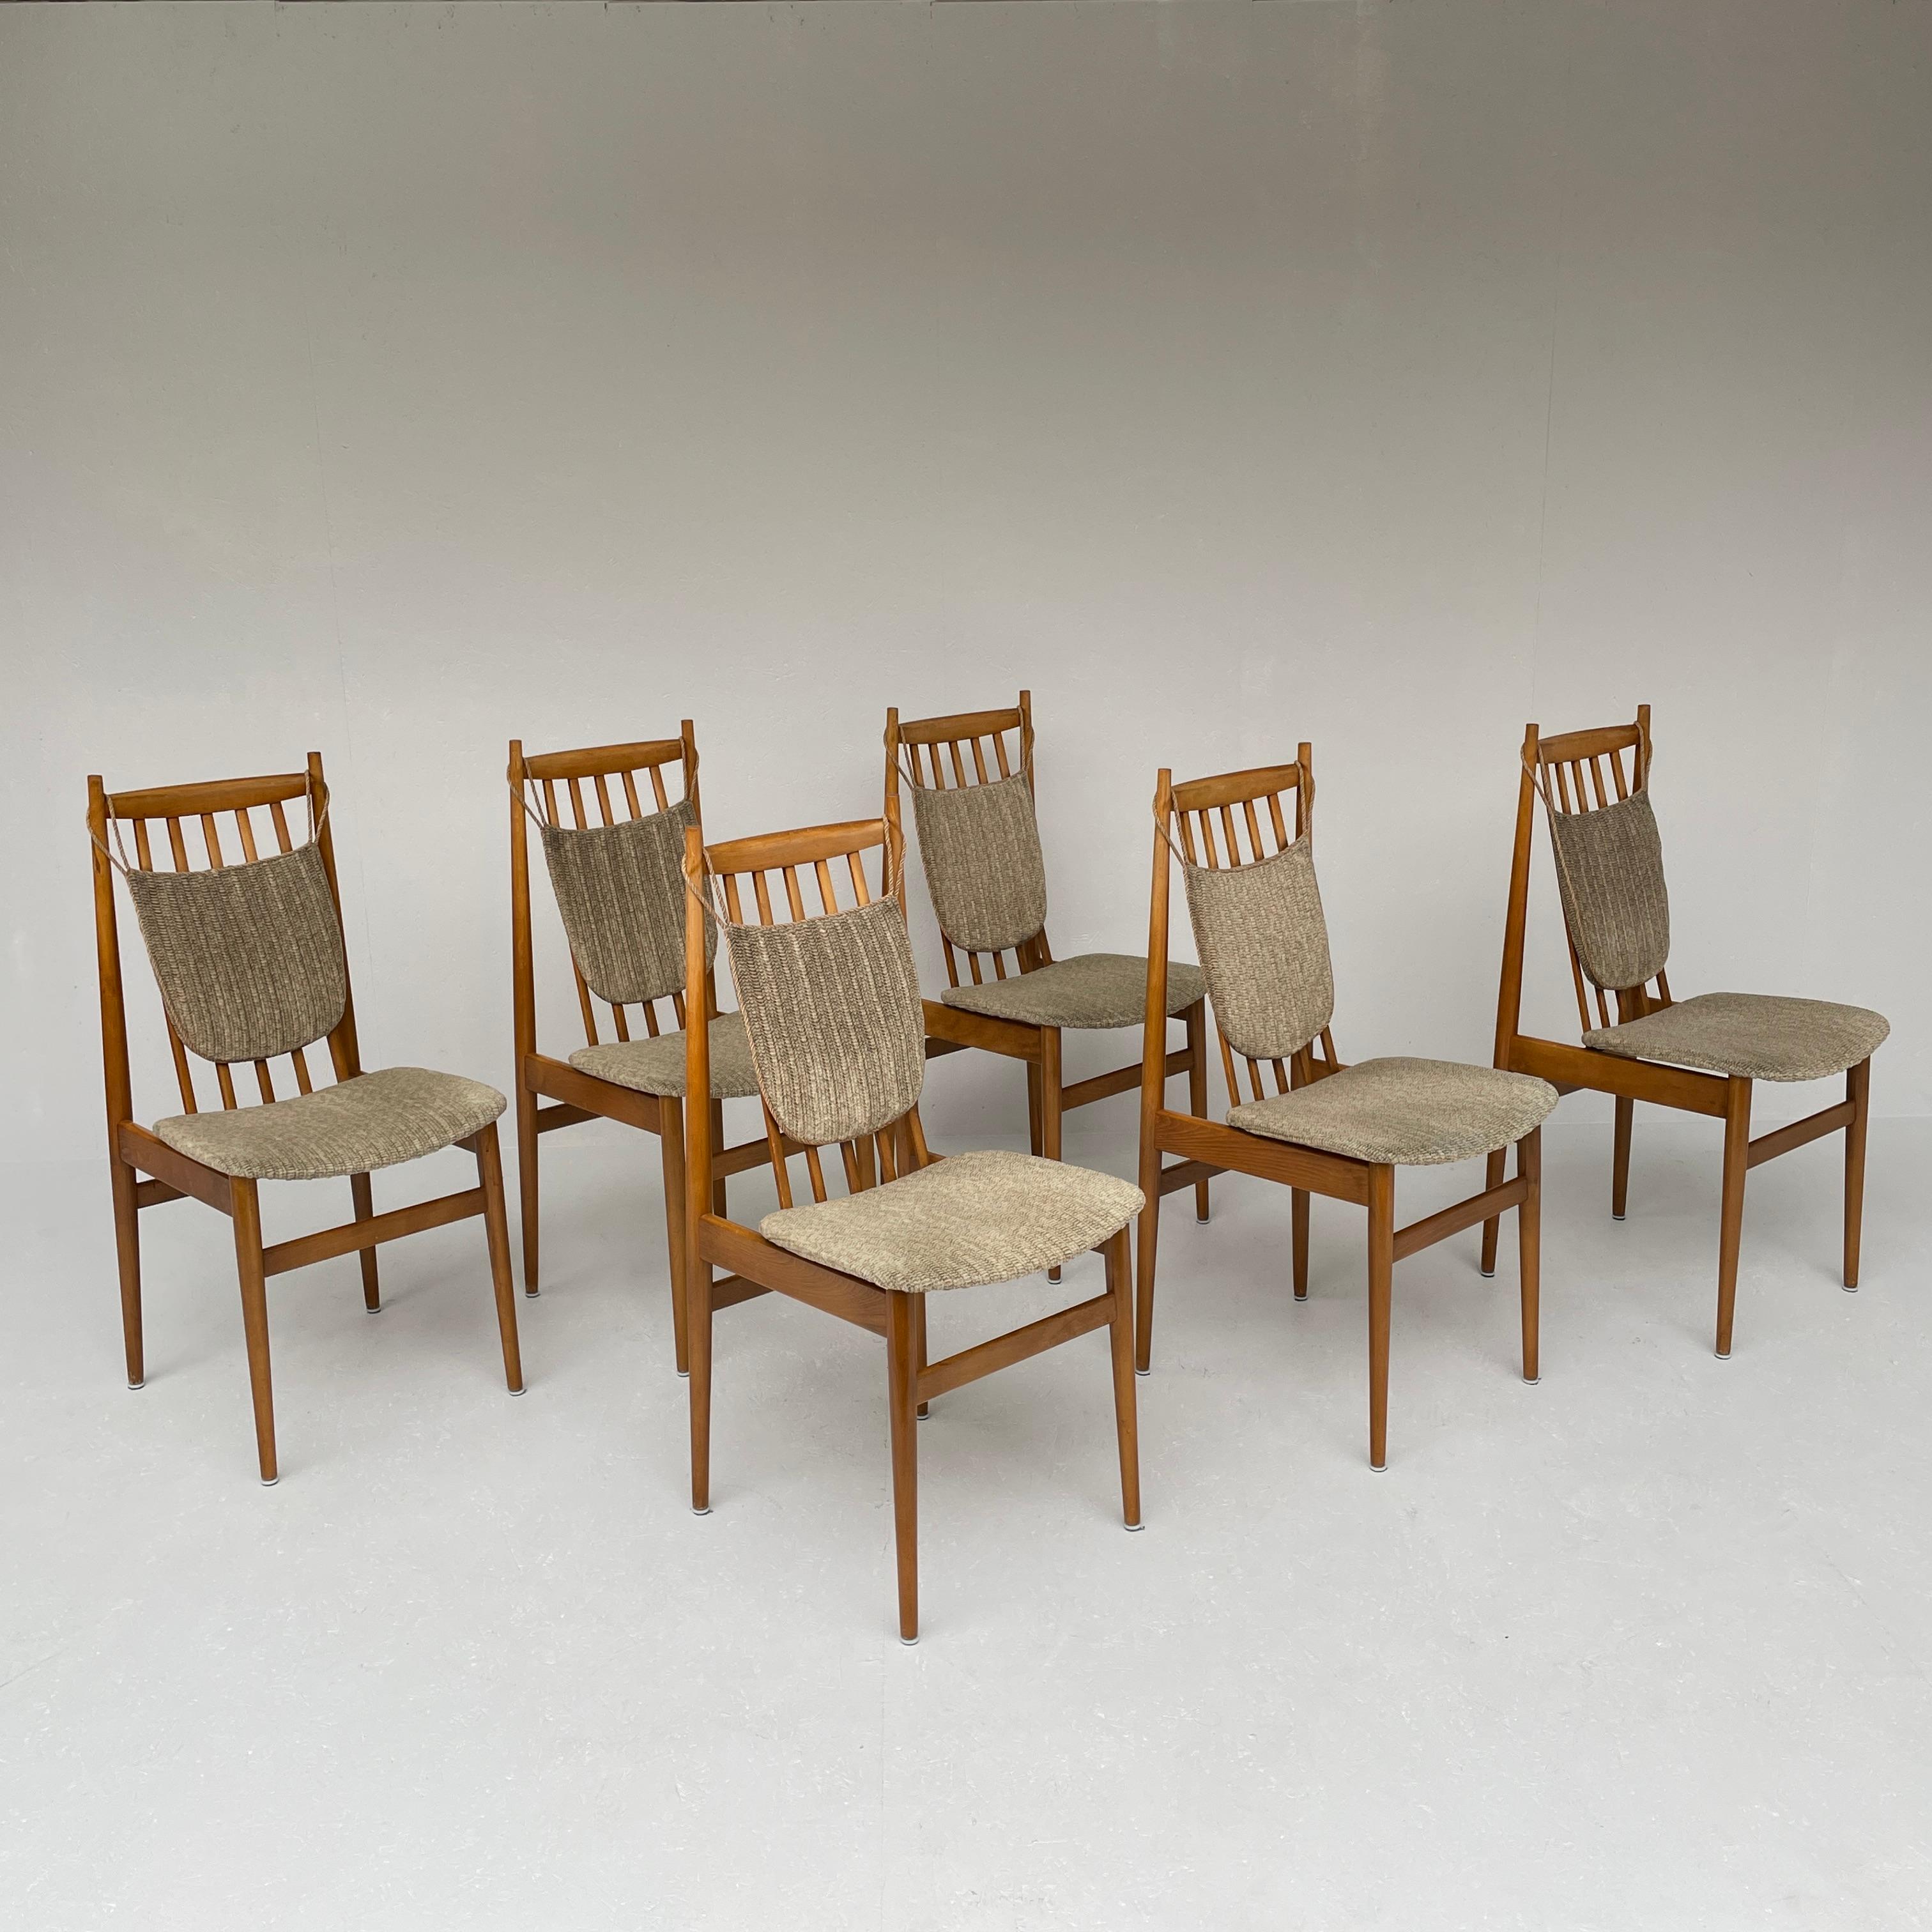 Mid-20th Century 6 Vintage Chairs by Casala